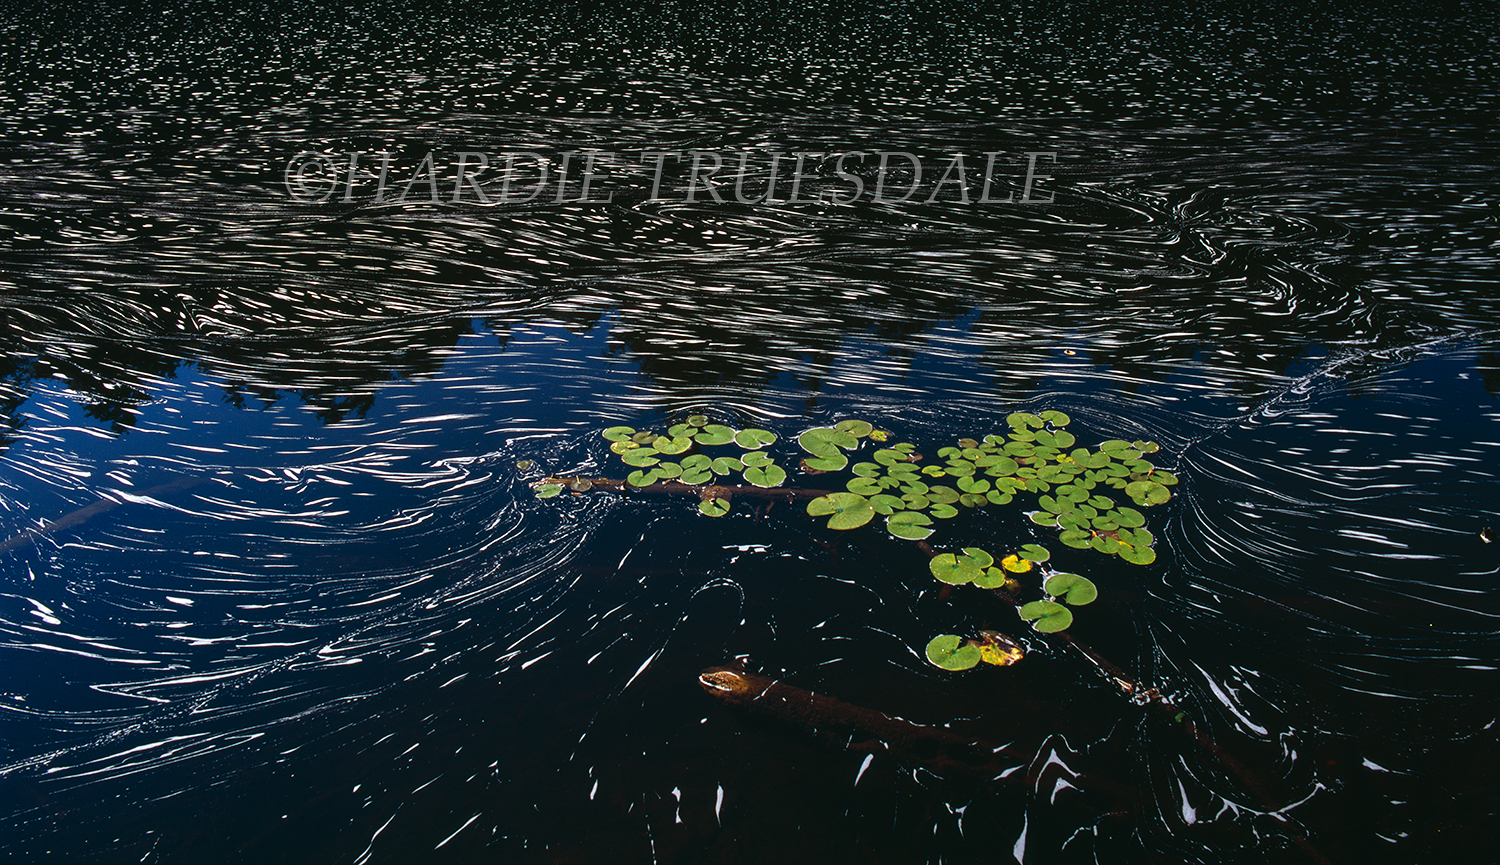 Adk#181 "Lily Pads, Lower Saranac River"